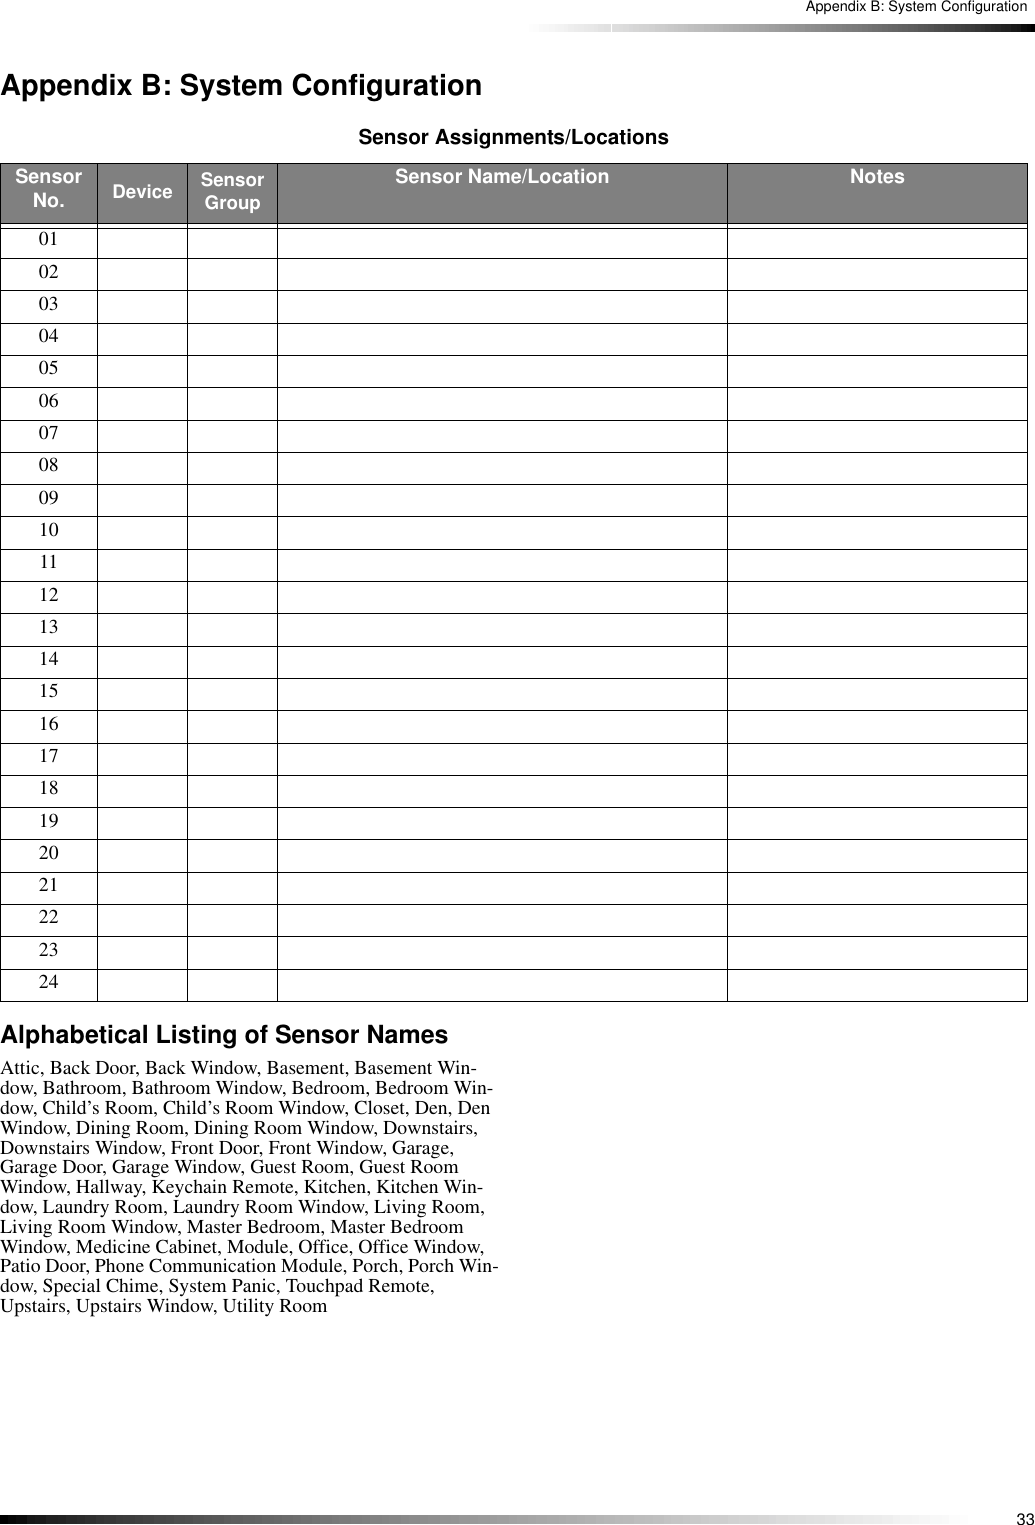 33Appendix B: System ConfigurationAppendix B: System ConfigurationAlphabetical Listing of Sensor NamesAttic, Back Door, Back Window, Basement, Basement Win-dow, Bathroom, Bathroom Window, Bedroom, Bedroom Win-dow, Child’s Room, Child’s Room Window, Closet, Den, Den Window, Dining Room, Dining Room Window, Downstairs, Downstairs Window, Front Door, Front Window, Garage, Garage Door, Garage Window, Guest Room, Guest Room Window, Hallway, Keychain Remote, Kitchen, Kitchen Win-dow, Laundry Room, Laundry Room Window, Living Room, Living Room Window, Master Bedroom, Master Bedroom Window, Medicine Cabinet, Module, Office, Office Window, Patio Door, Phone Communication Module, Porch, Porch Win-dow, Special Chime, System Panic, Touchpad Remote, Upstairs, Upstairs Window, Utility RoomSensor Assignments/LocationsSensor No. Device Sensor GroupSensor Name/Location Notes010203040506070809101112131415161718192021222324